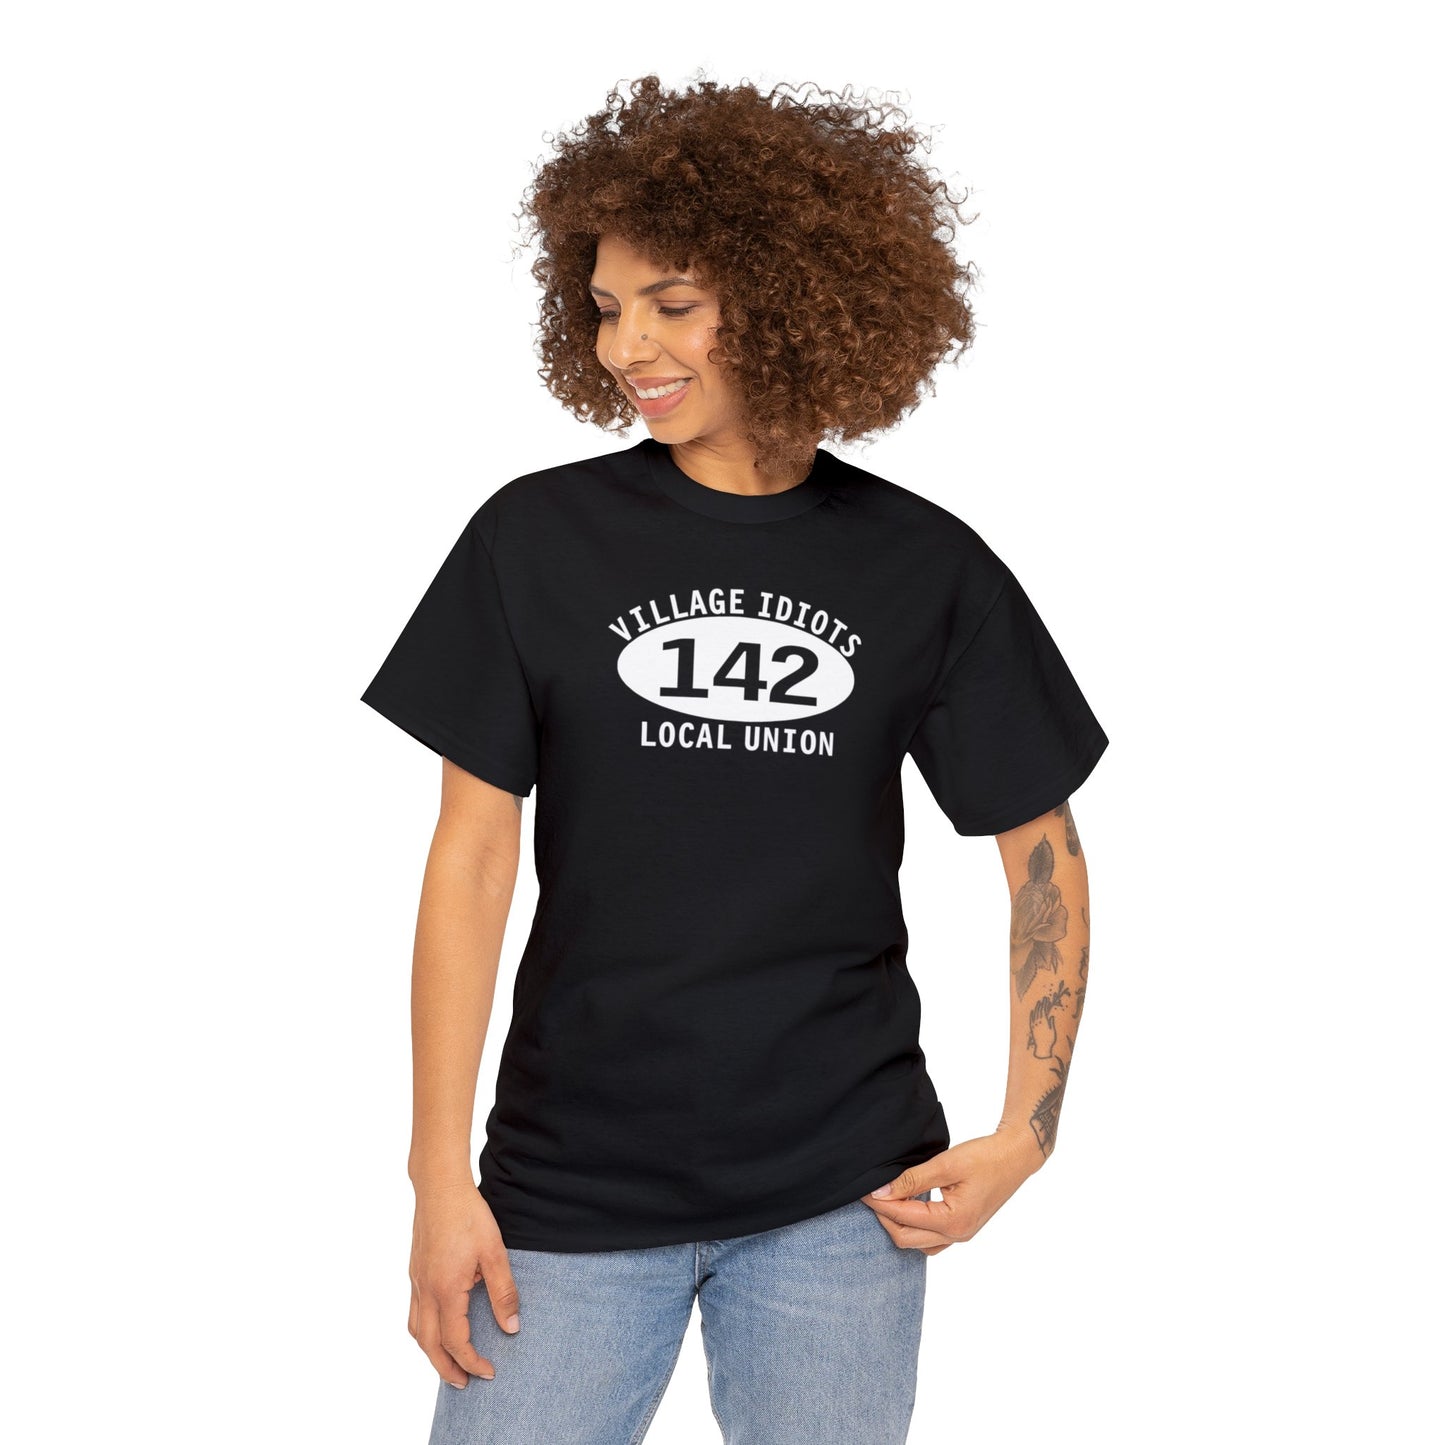 Village Idiots Local Union 142, funny Parody t-shirt, Funny Parody T-shirt Gift, Union Funny T-Shirt, Funny Gift for Dad